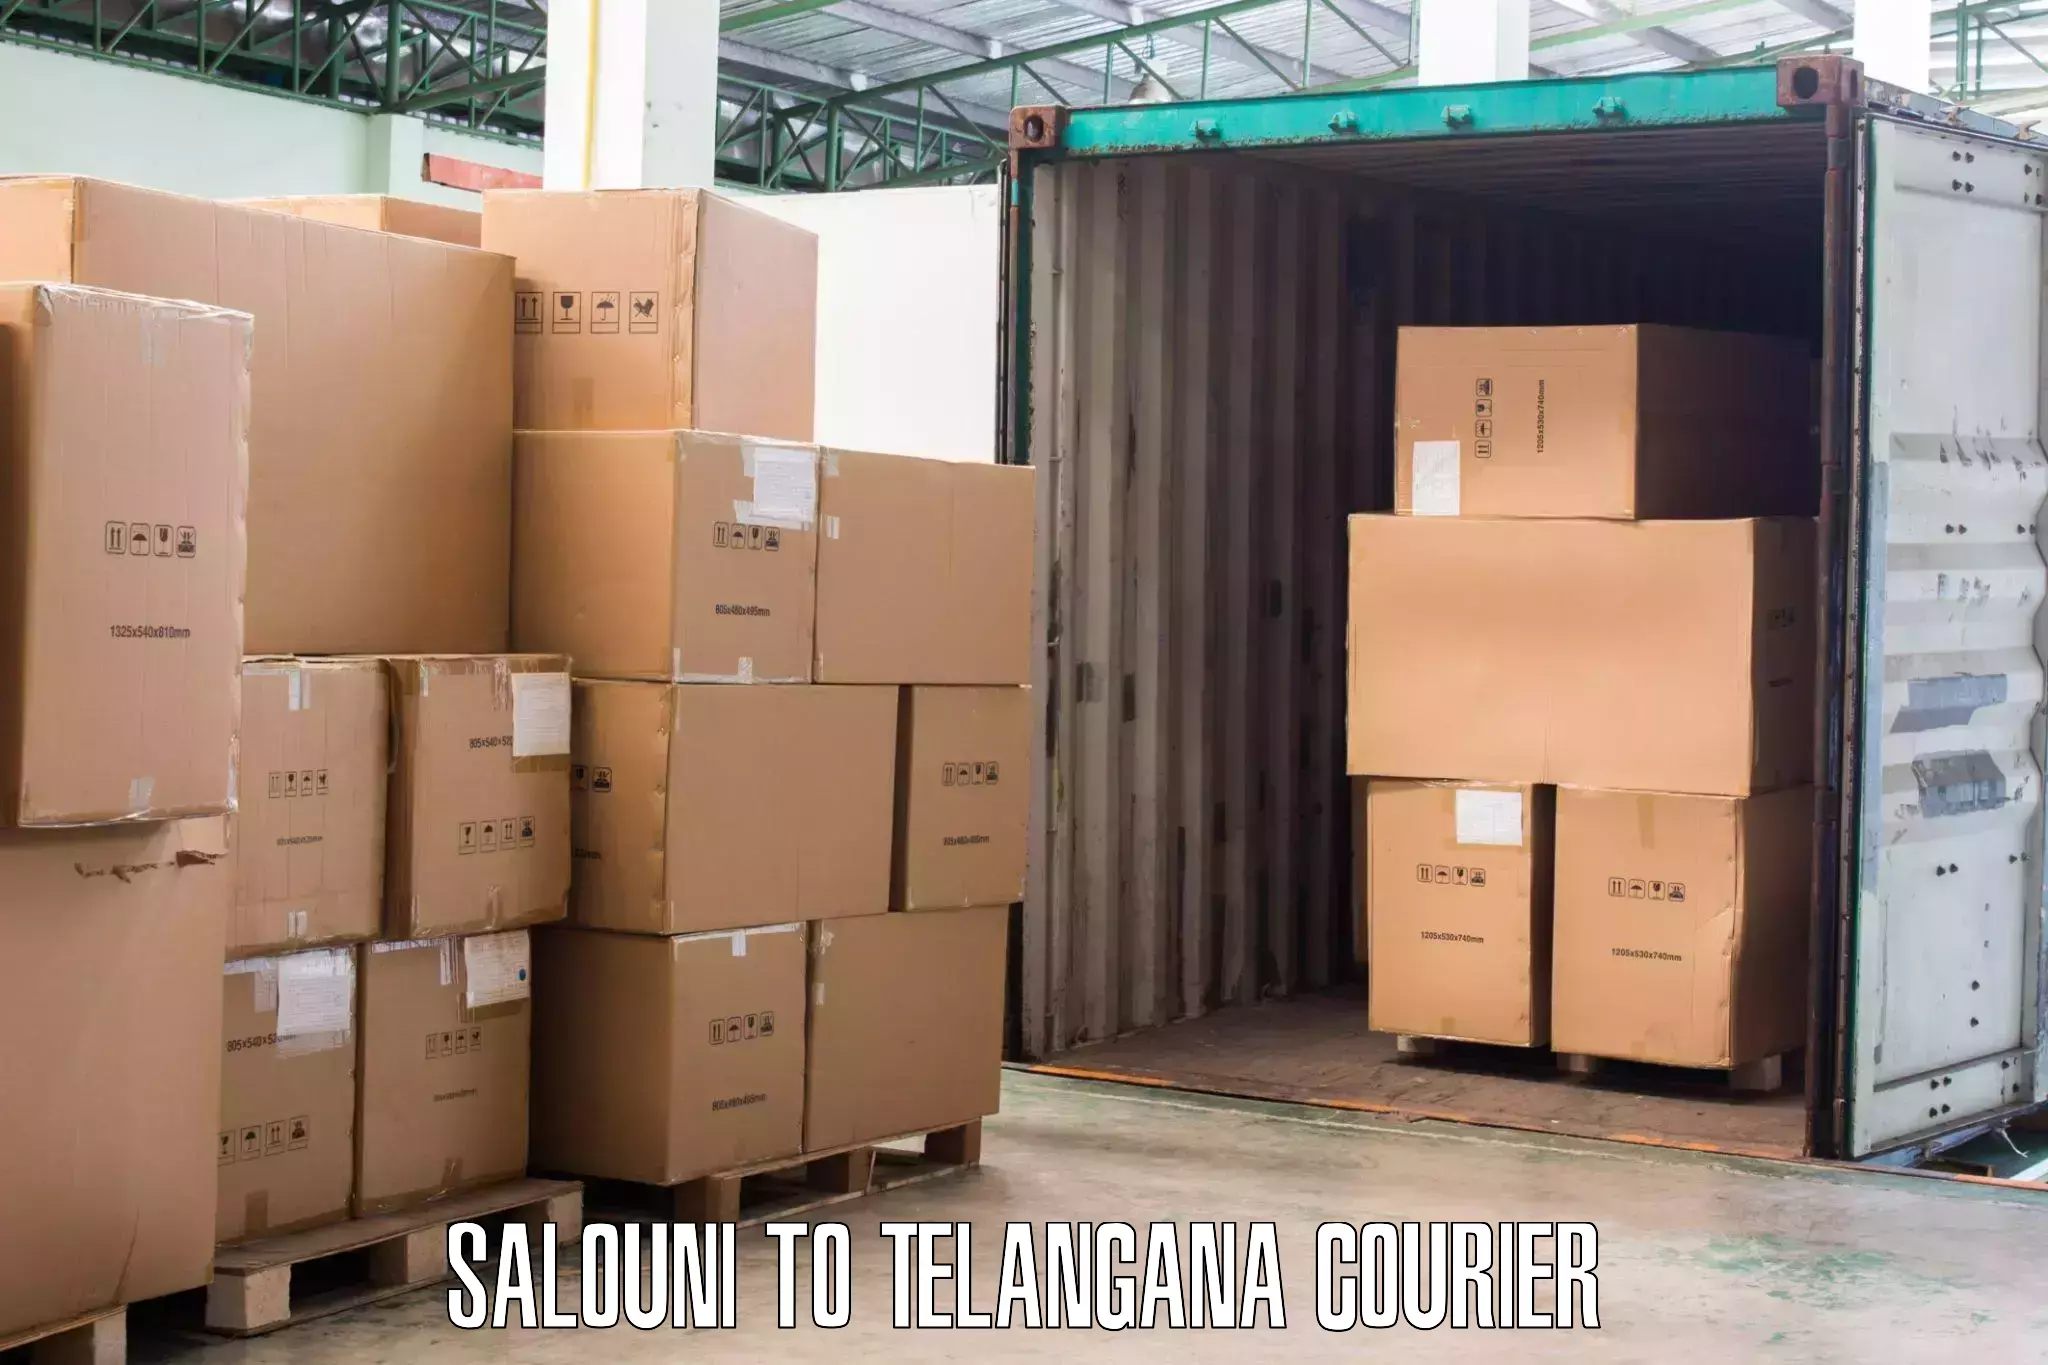 Efficient relocation services in Salouni to Telangana